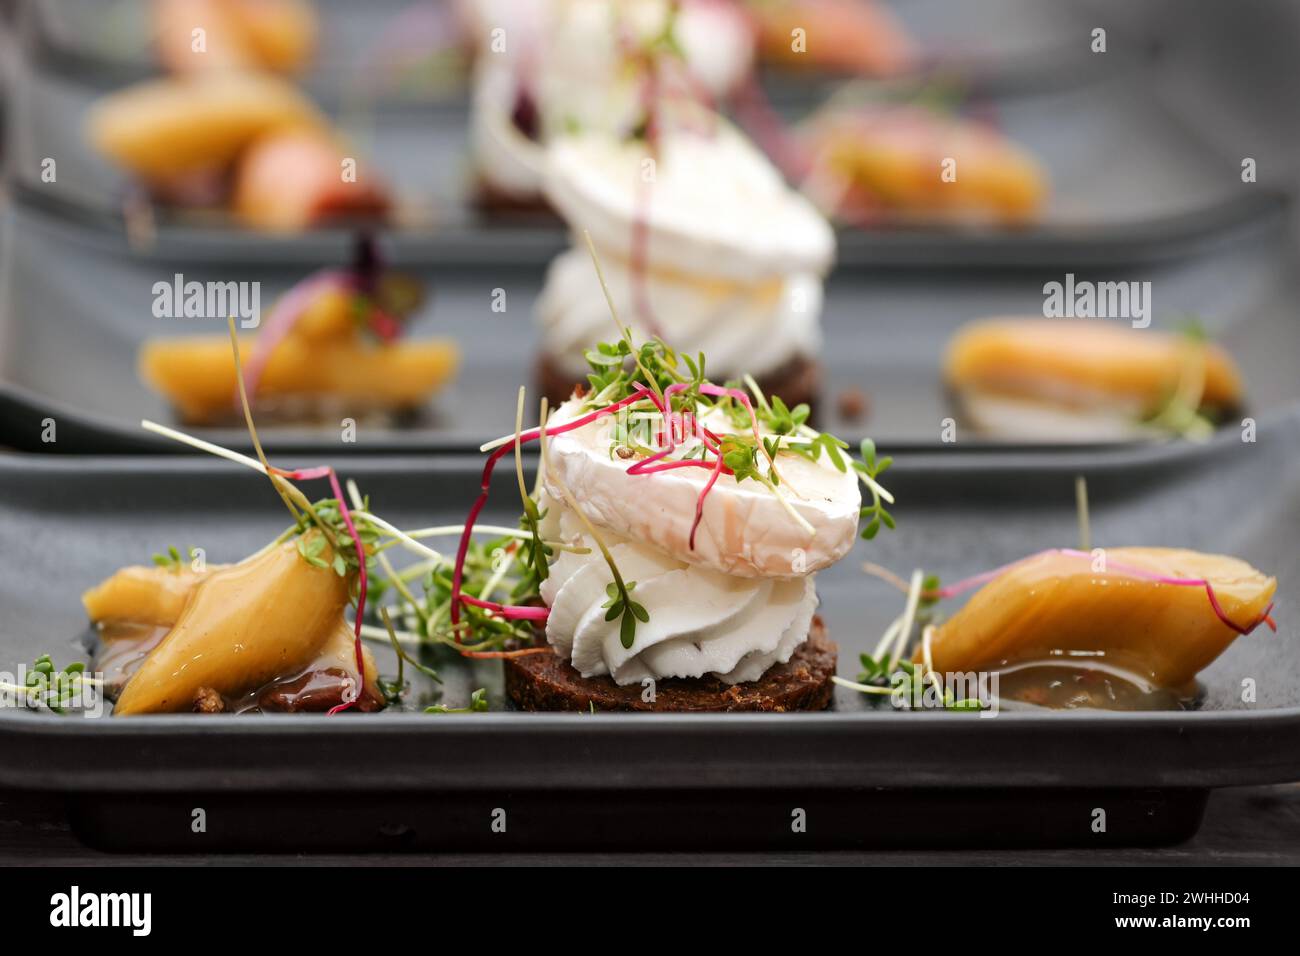 Appetizer dish from savory cream and goat cheese on pumpernickel bread with rhubarb pieces and sprout garnish served on black pl Stock Photo